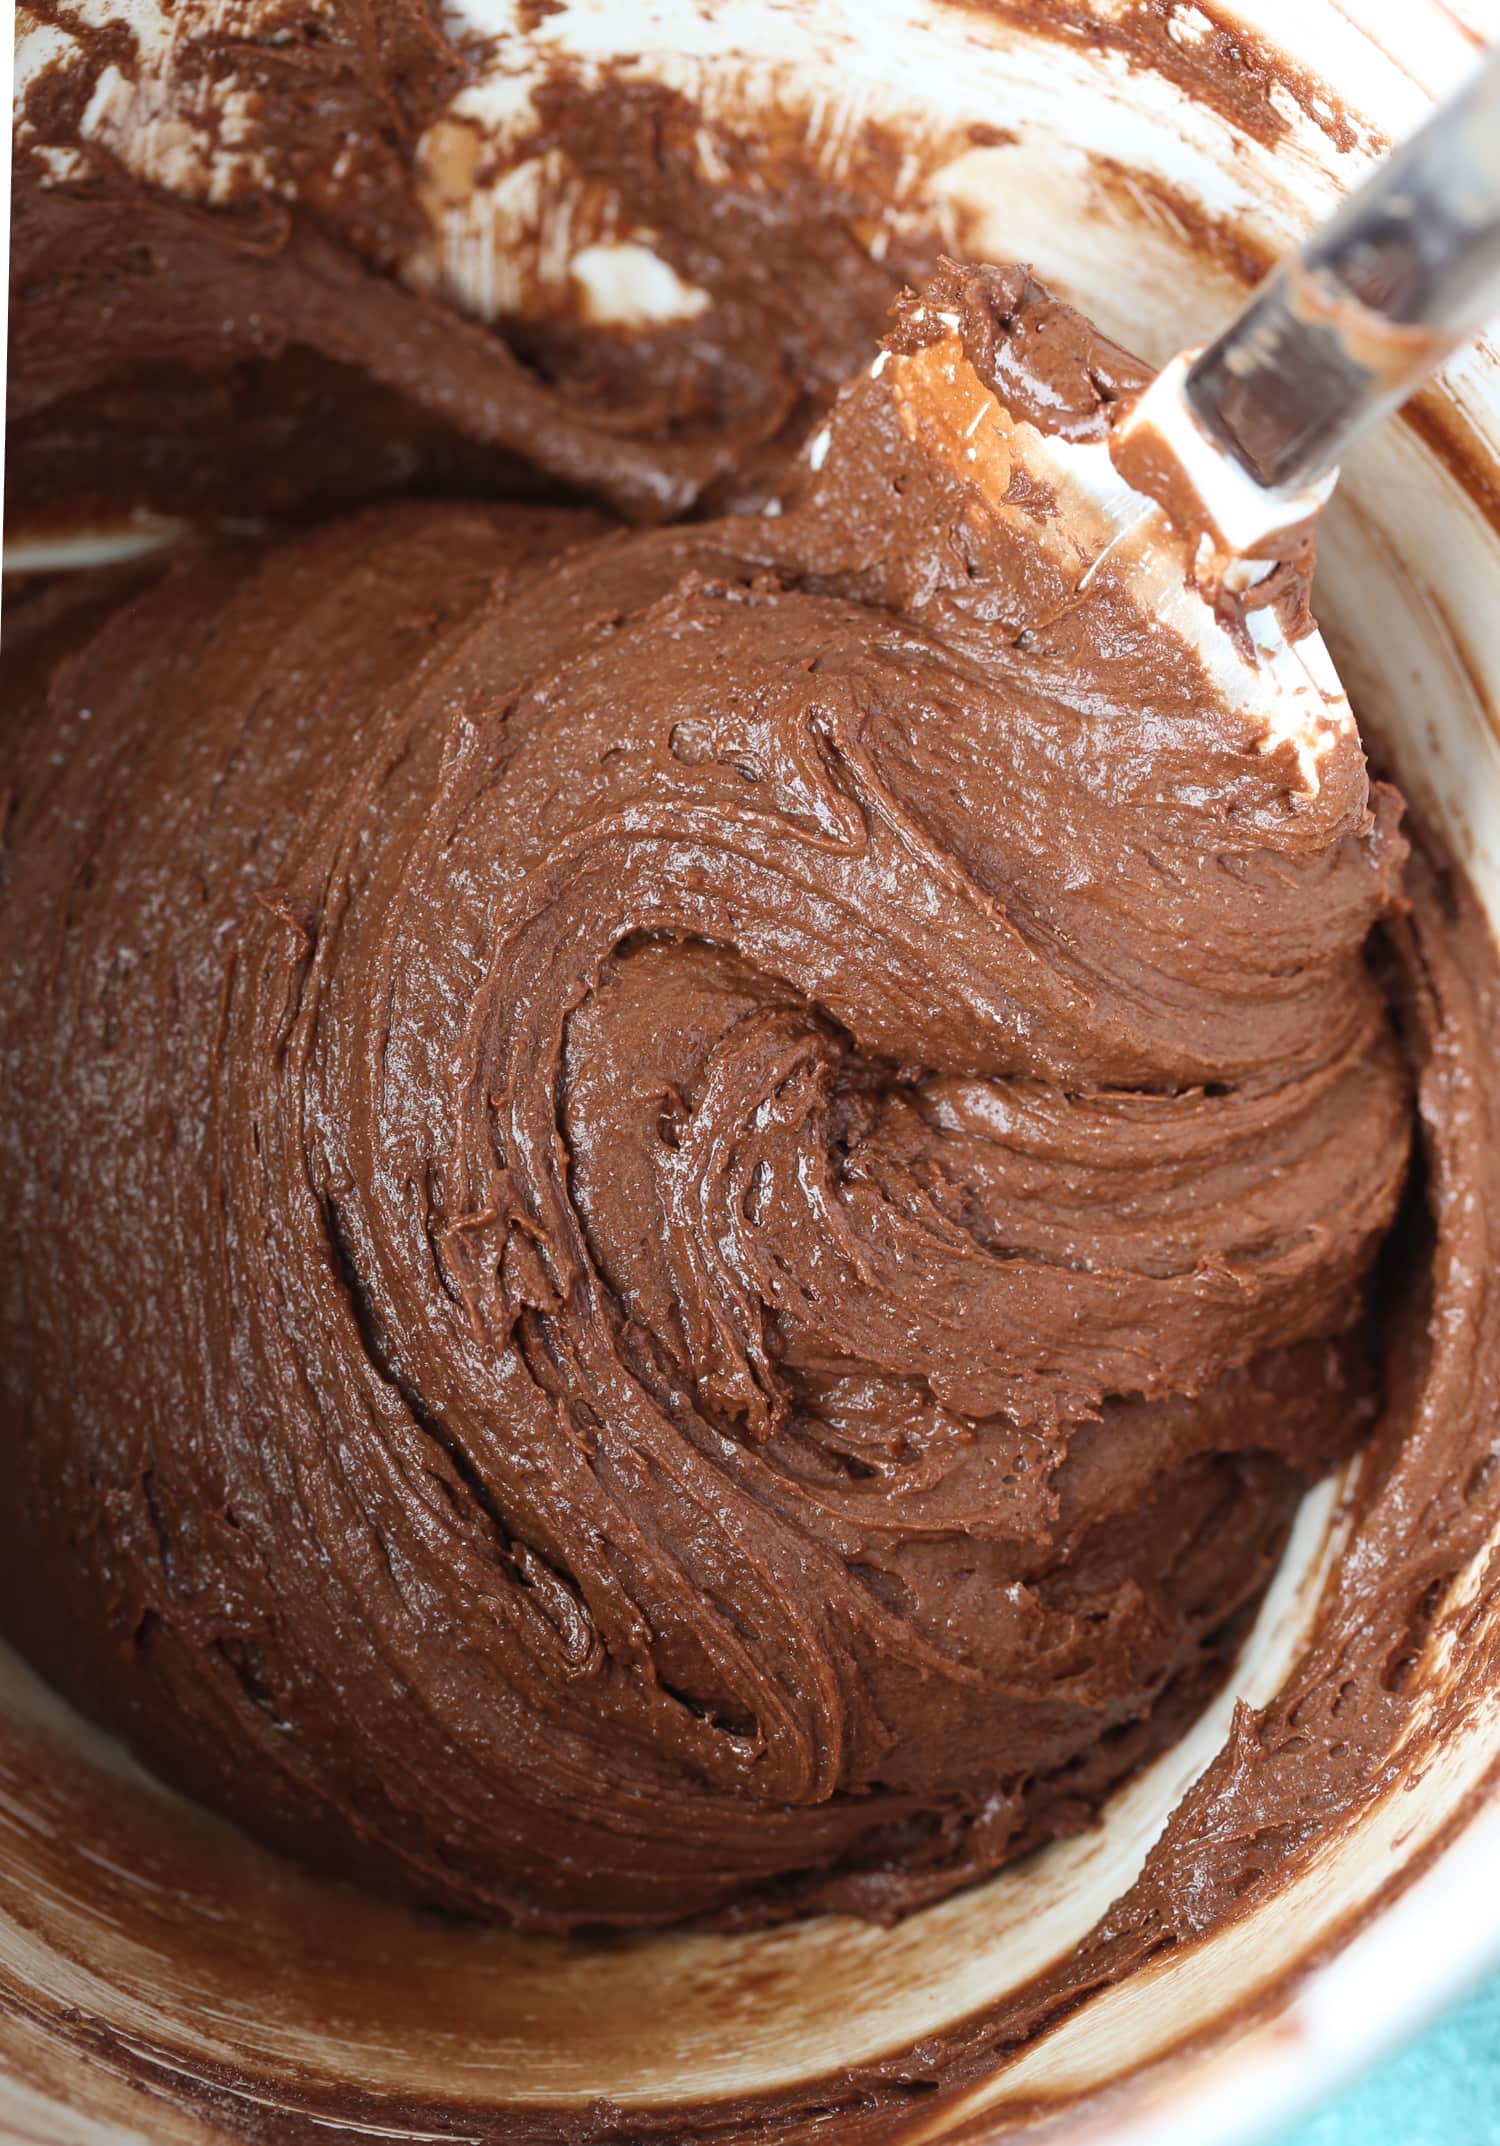 Chocolate cookie dough comes together in a mixing bowl.